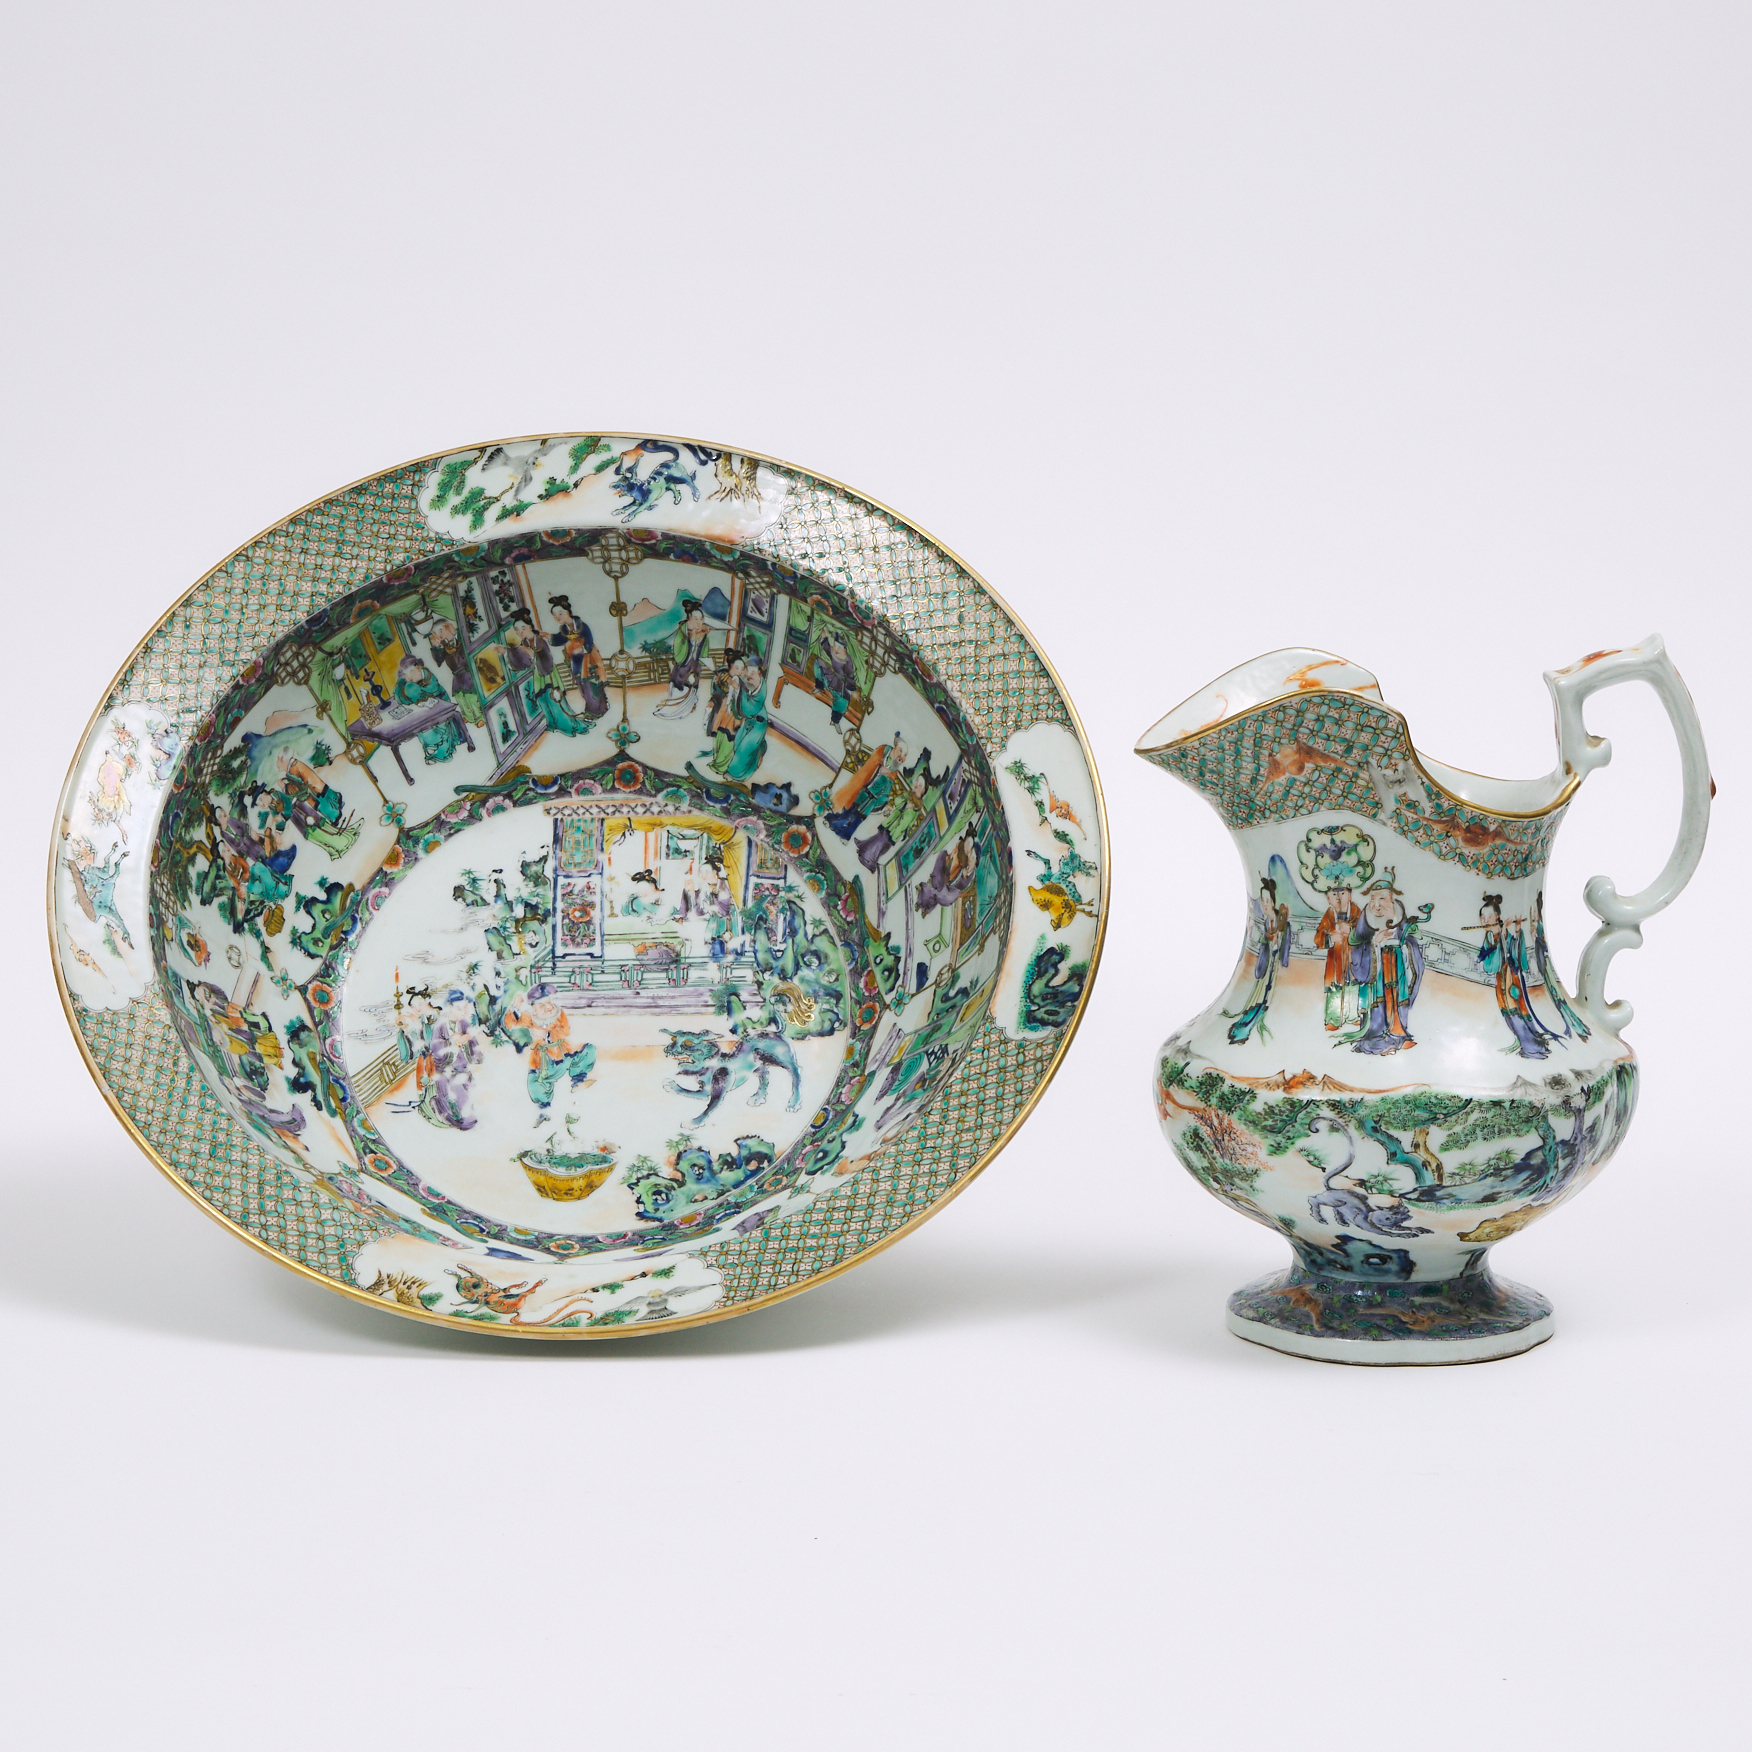 A Famille Verte Pitcher and Basin, 19th Century